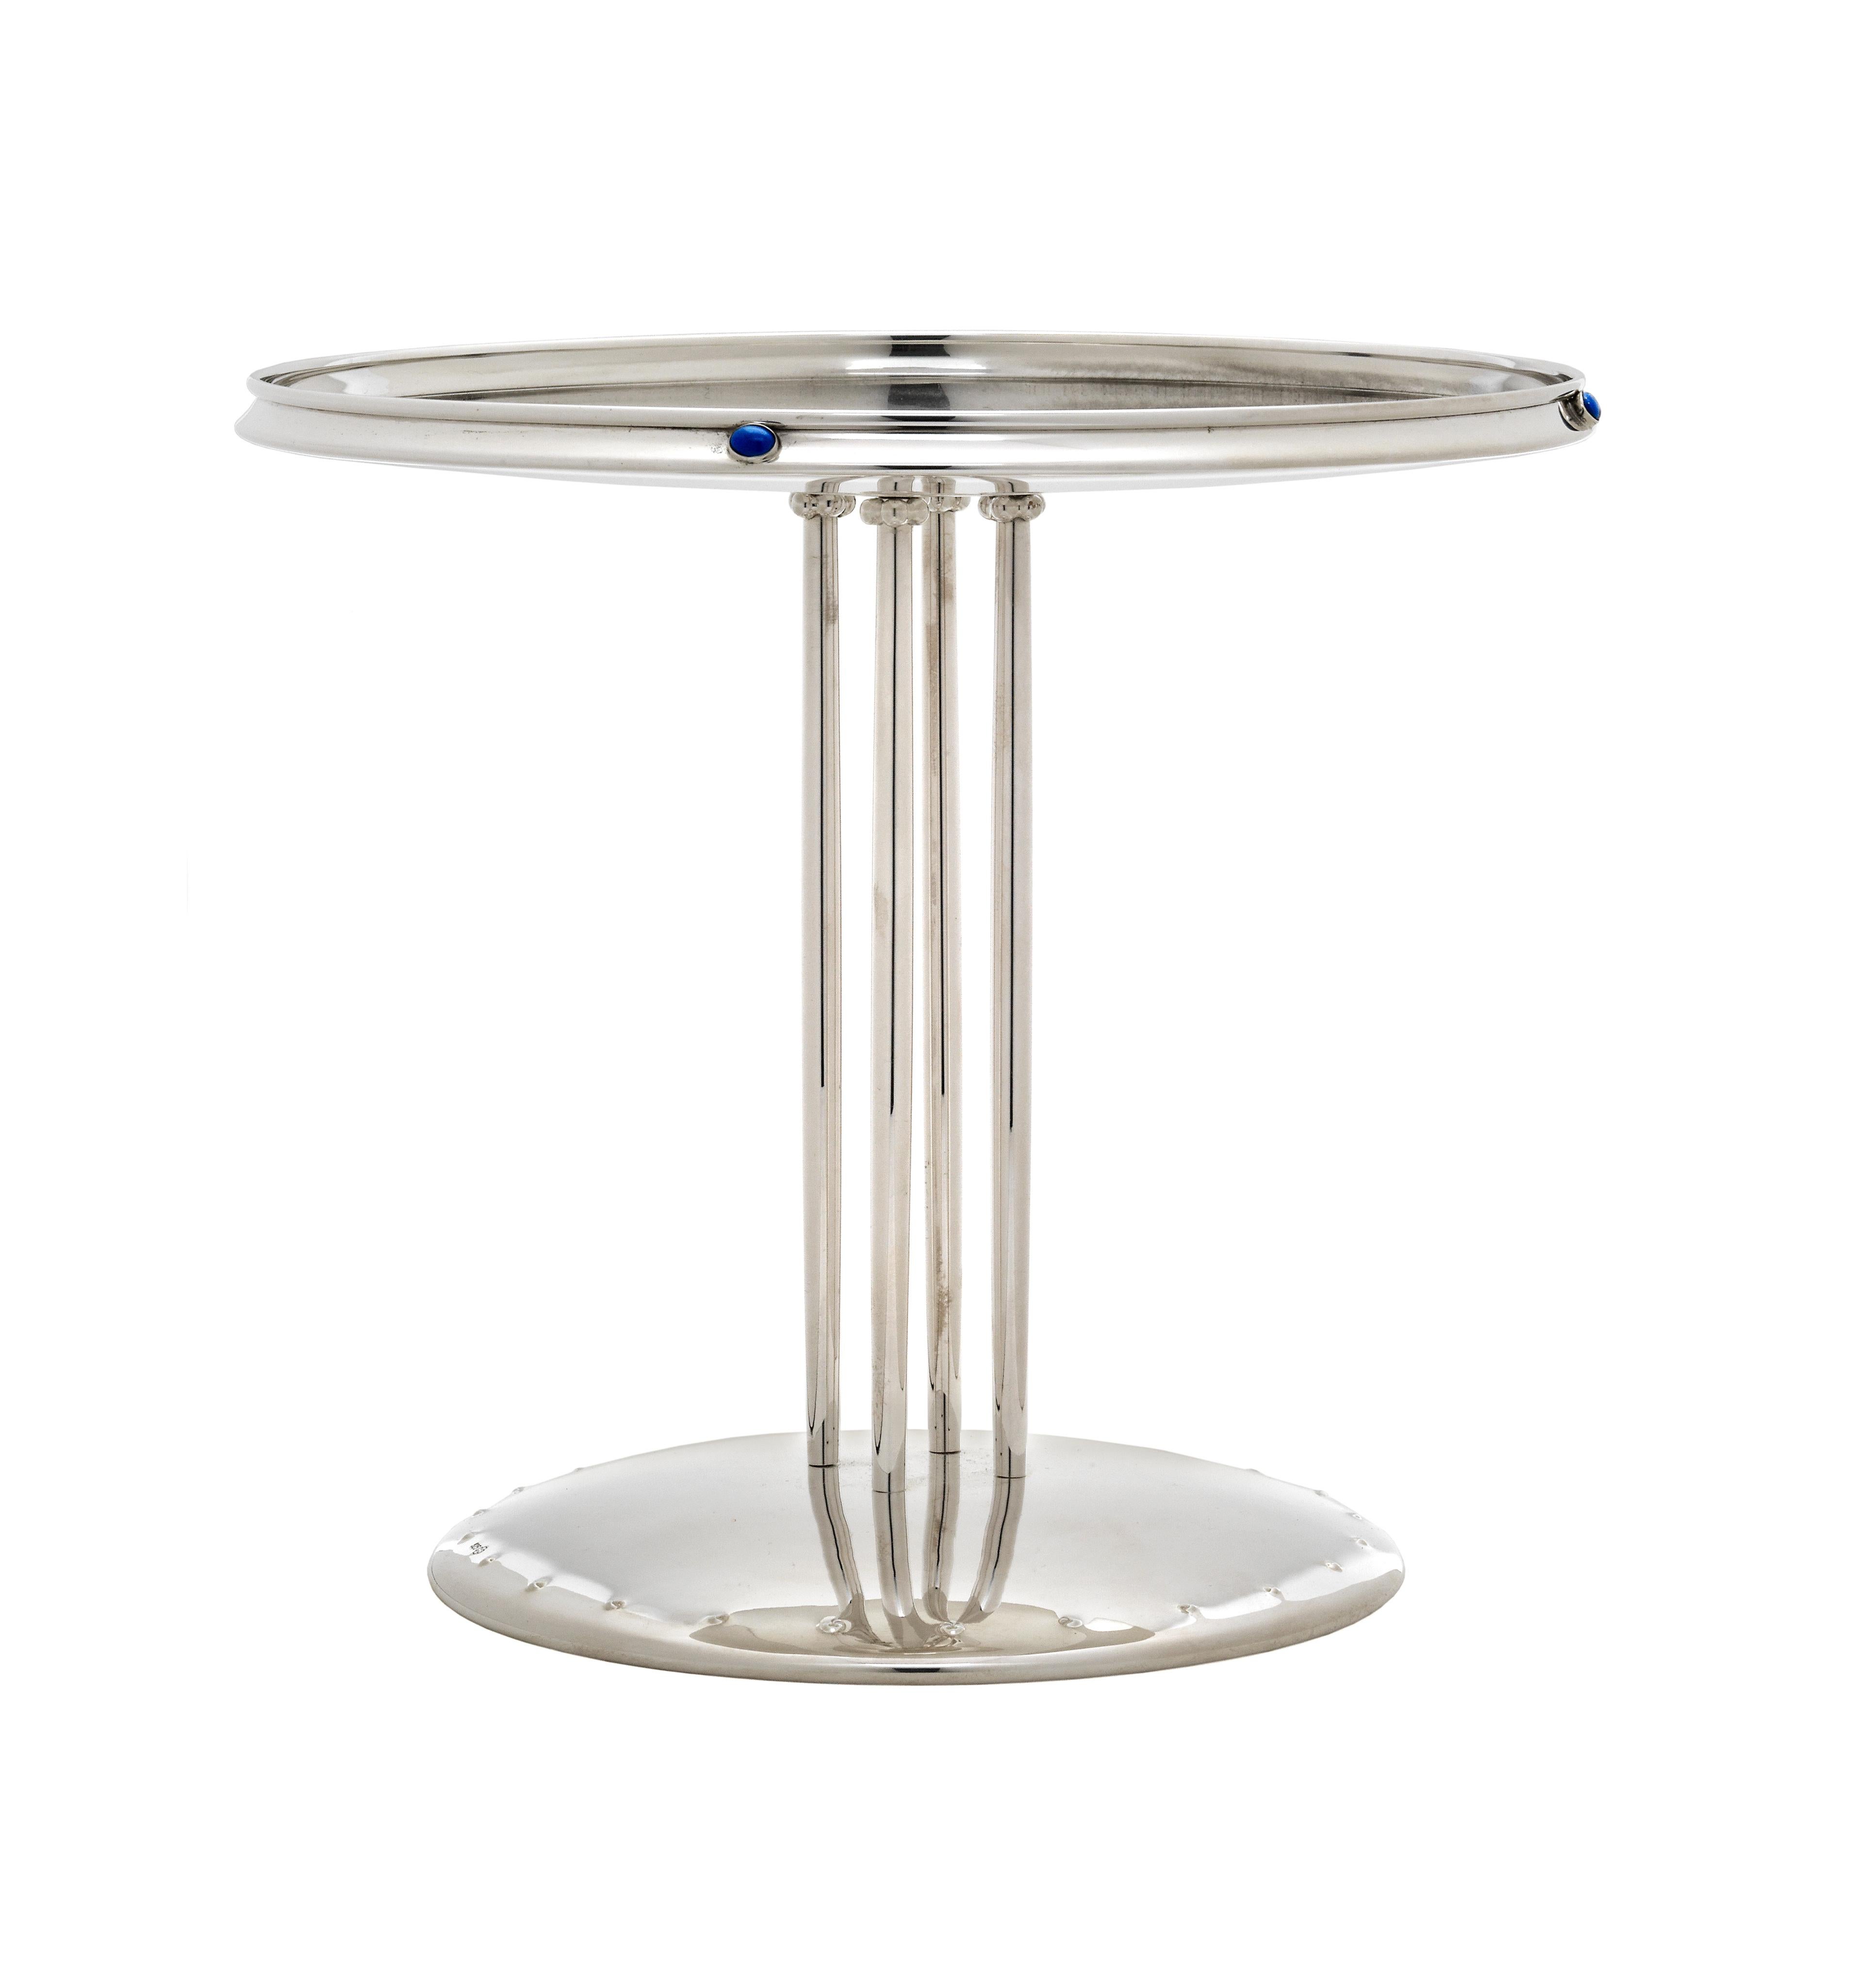 This sculptural centerpiece is made from an early design by Josef Hoffman. Its pure, long-legged physique and the smooth surface of its base are revolutionary. Its only adornment consists of four semi precious stones. Designed in 1902, this